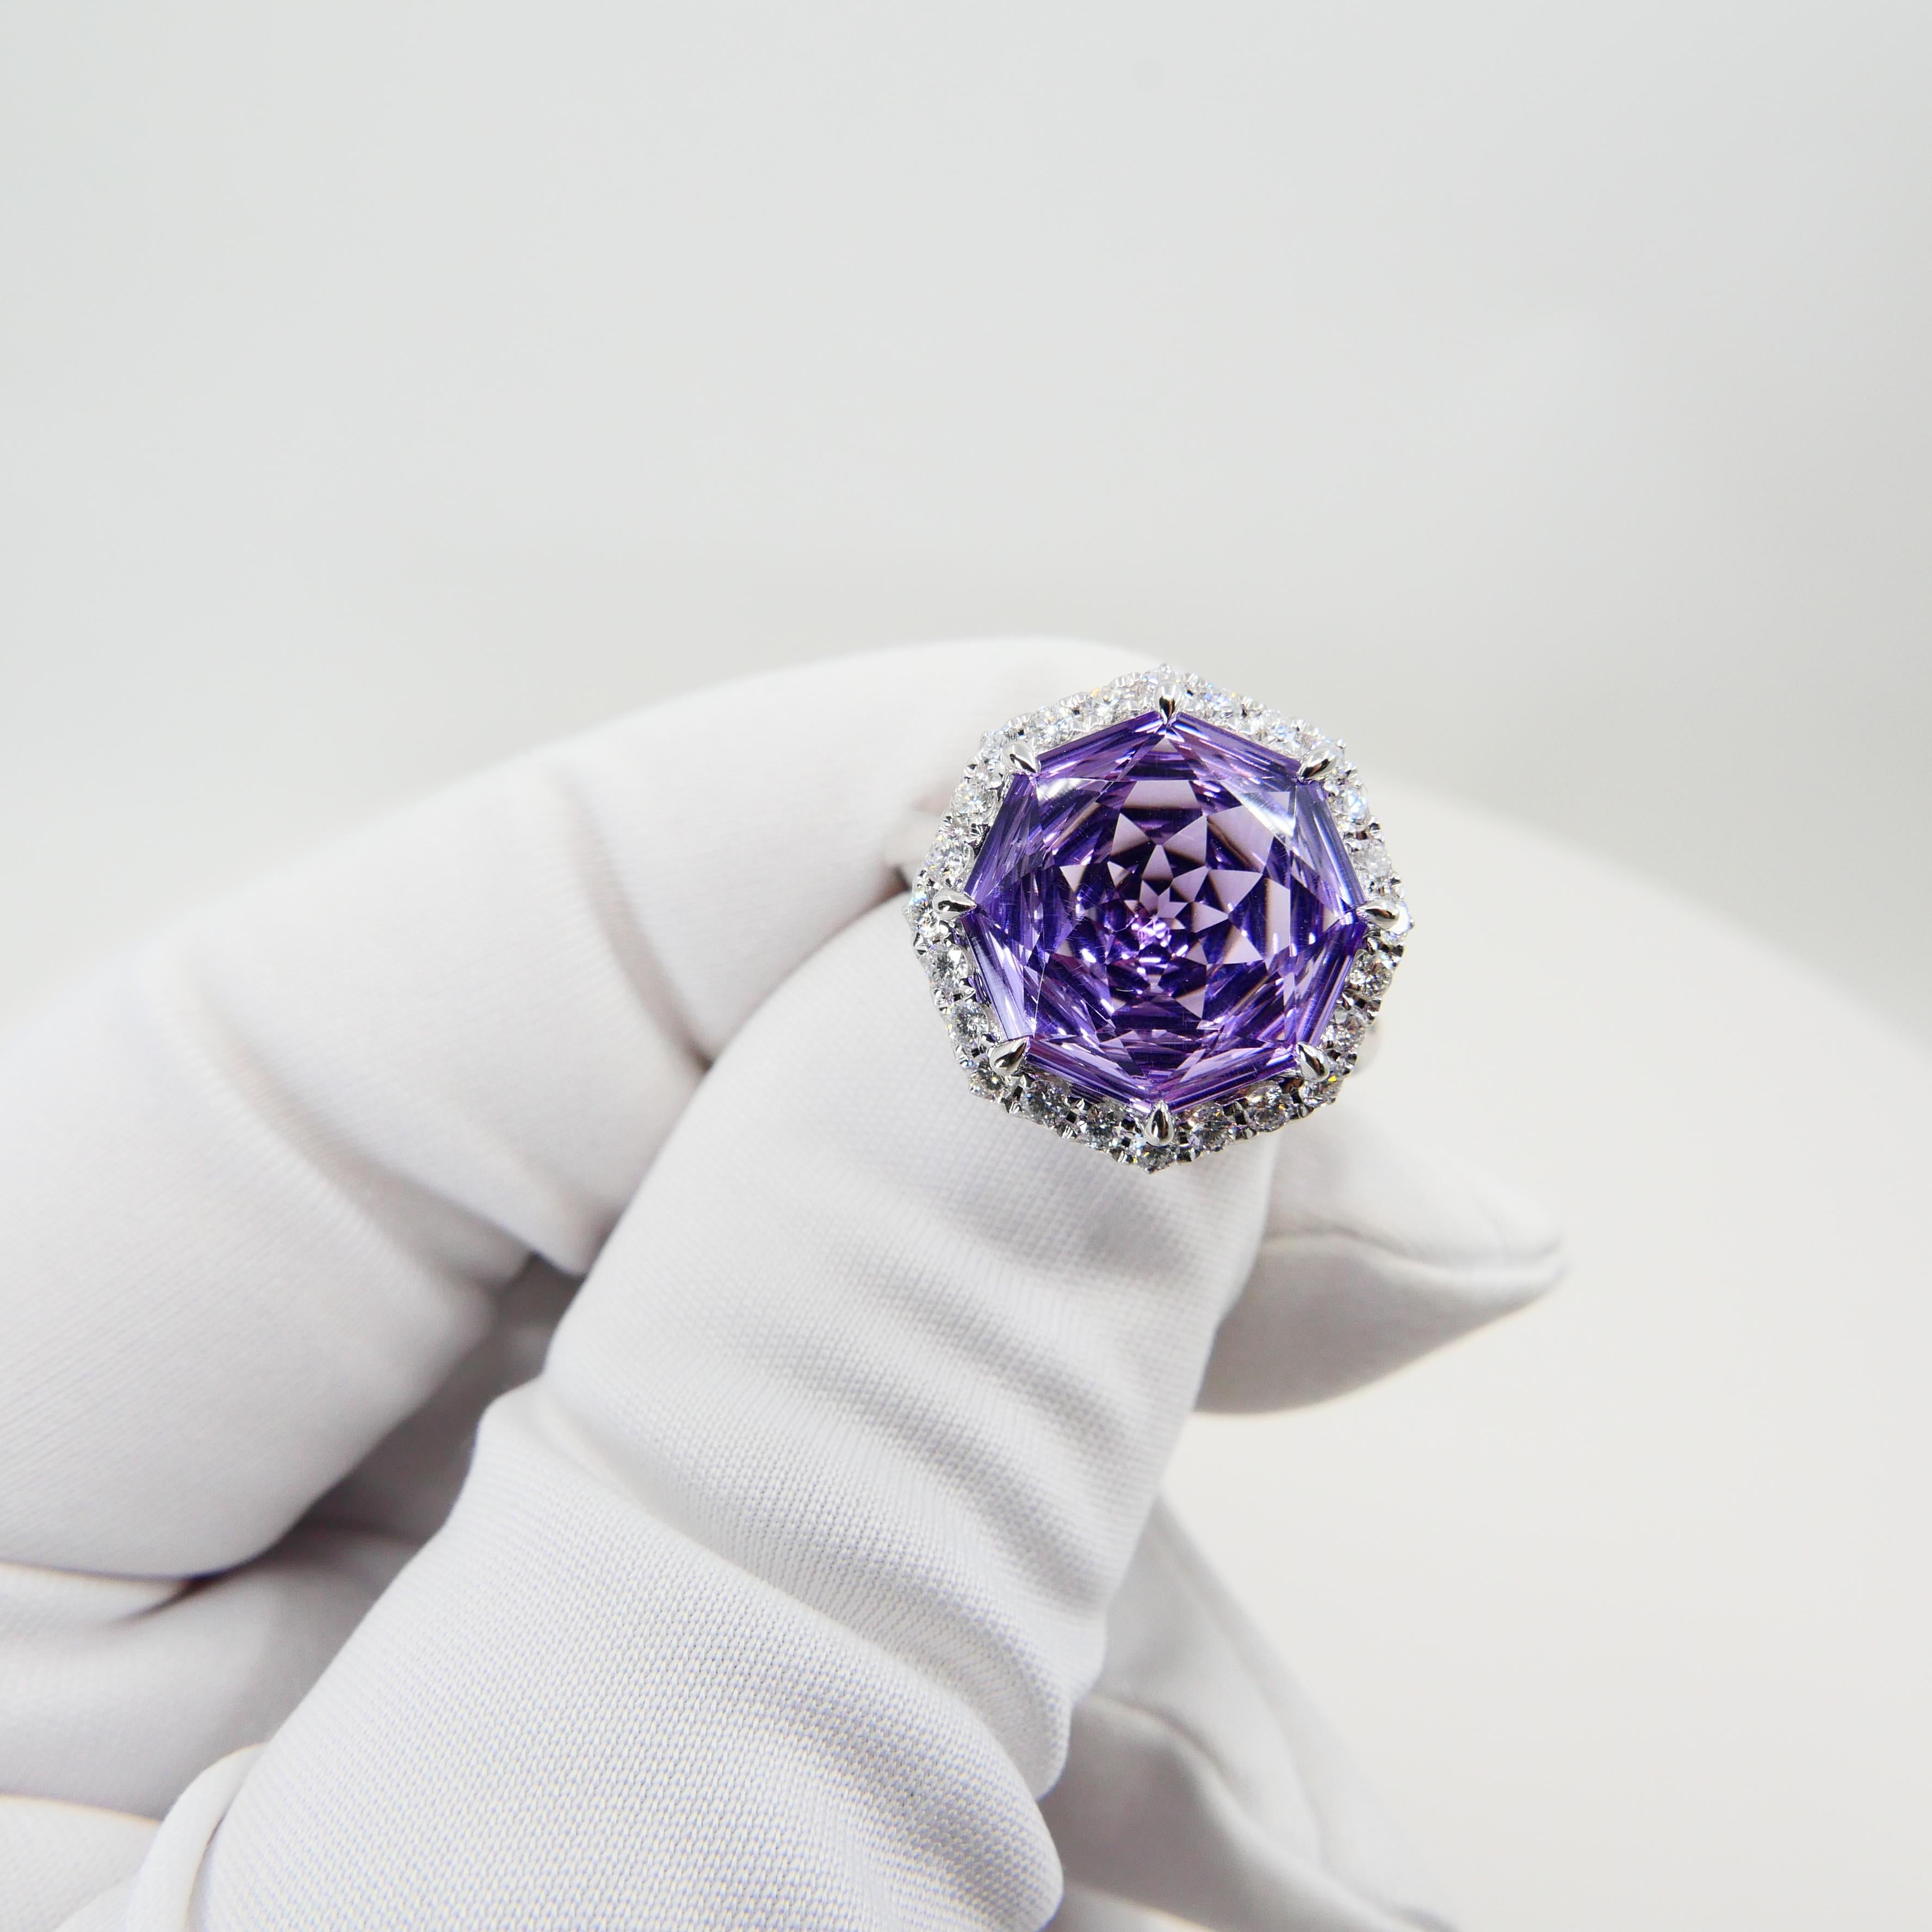 Octagon Cut 5.32 Carat Flower Cut Amethyst and Diamond Cocktail Ring, Statement Ring